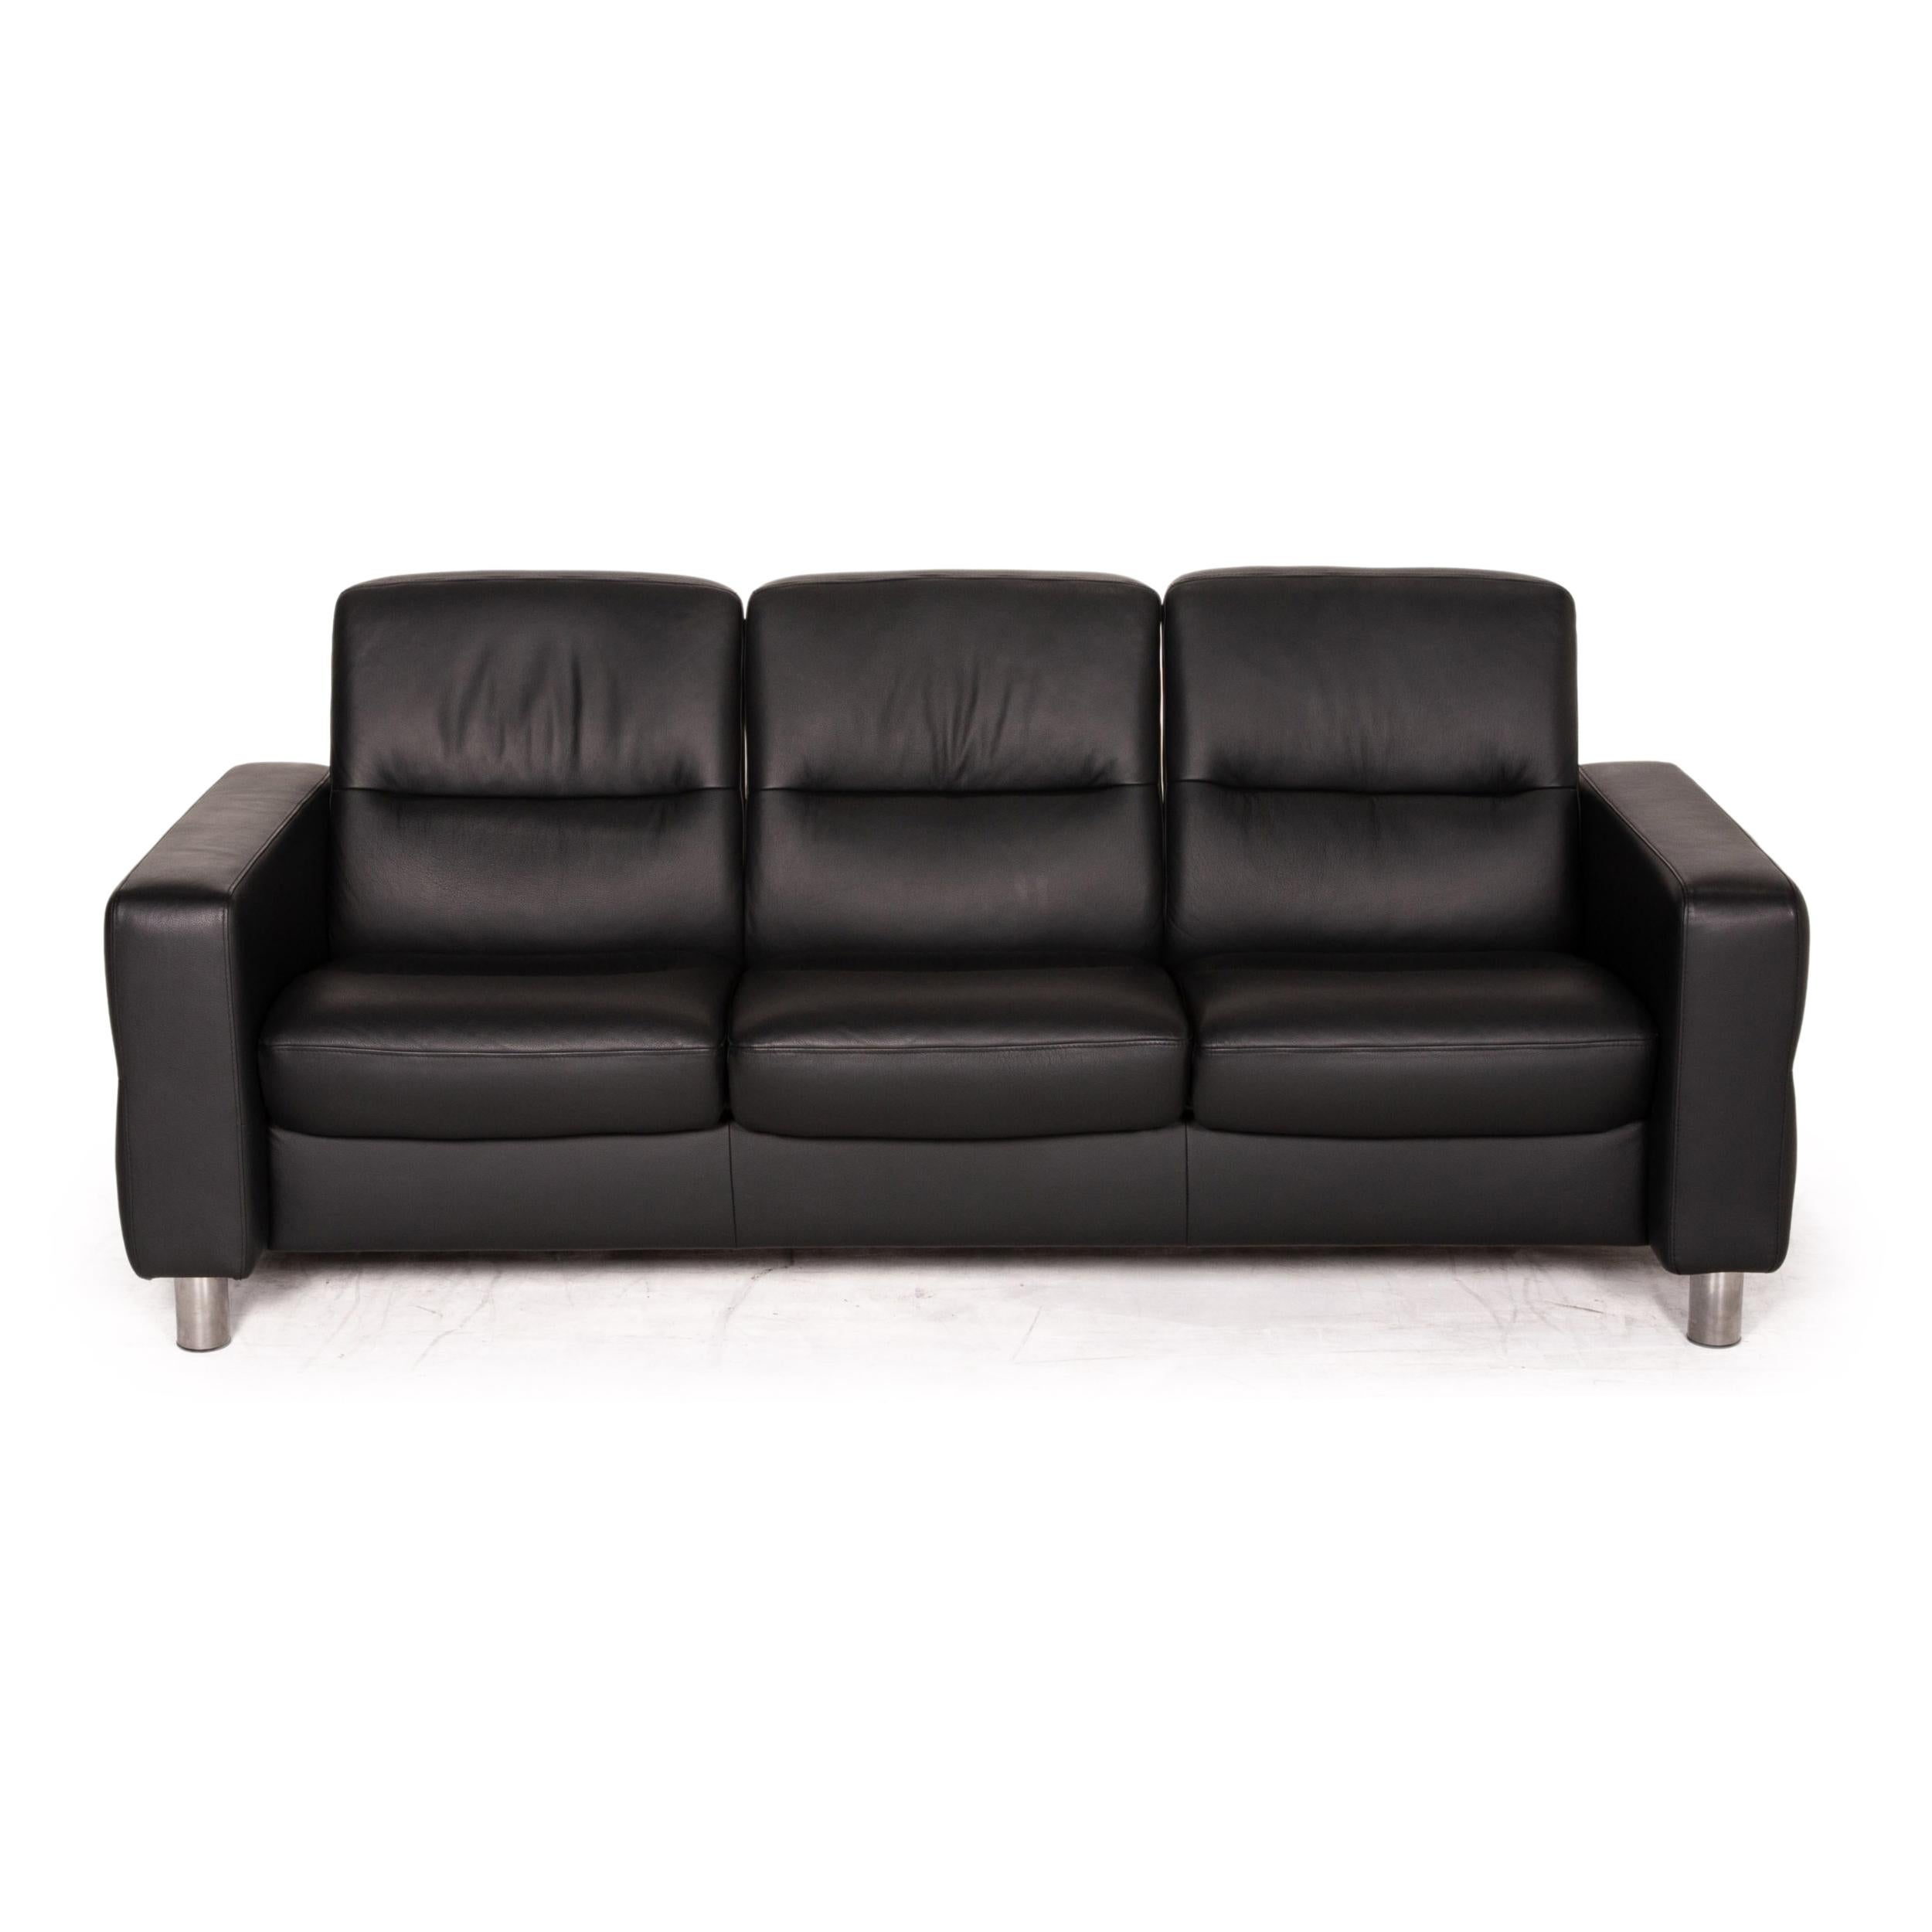 Stressless Waver Three Seater Leather Sofa Black Couch 2